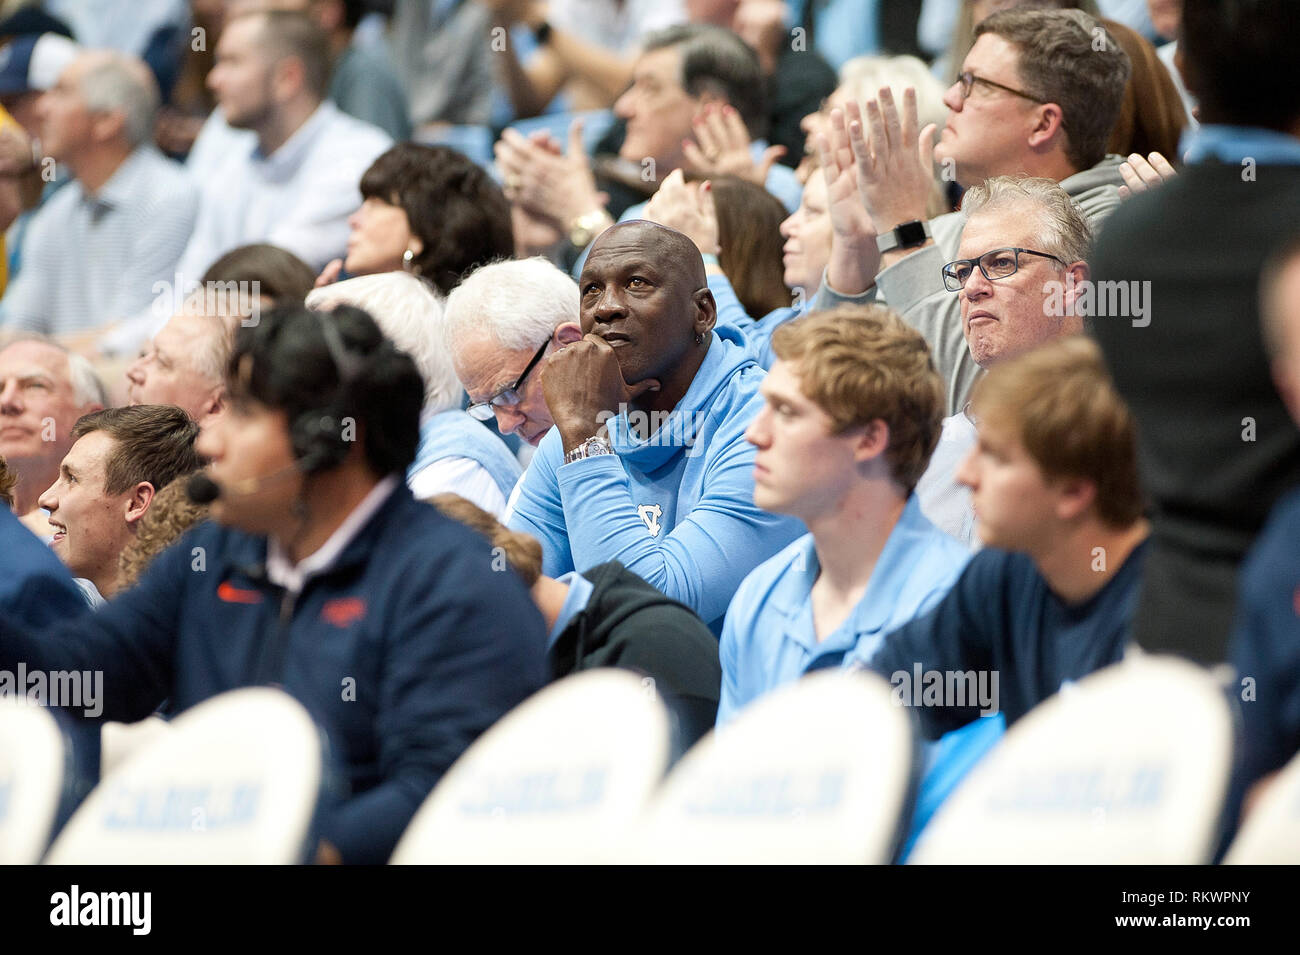 Feb. 11, 2019 - Chapel Hill, North Carolina; USA - NBA Legend MICHAEL JORDAN looks on as the University of North Carolina Tar Heels were defeated the Virginia Cavaleirs with a final score of 69=61 as they played mens college basketball at the Dean Smith Center located in Chapel Hill. Copyright 2019 Jason Moore. Credit: Jason Moore/ZUMA Wire/Alamy Live News Stock Photo